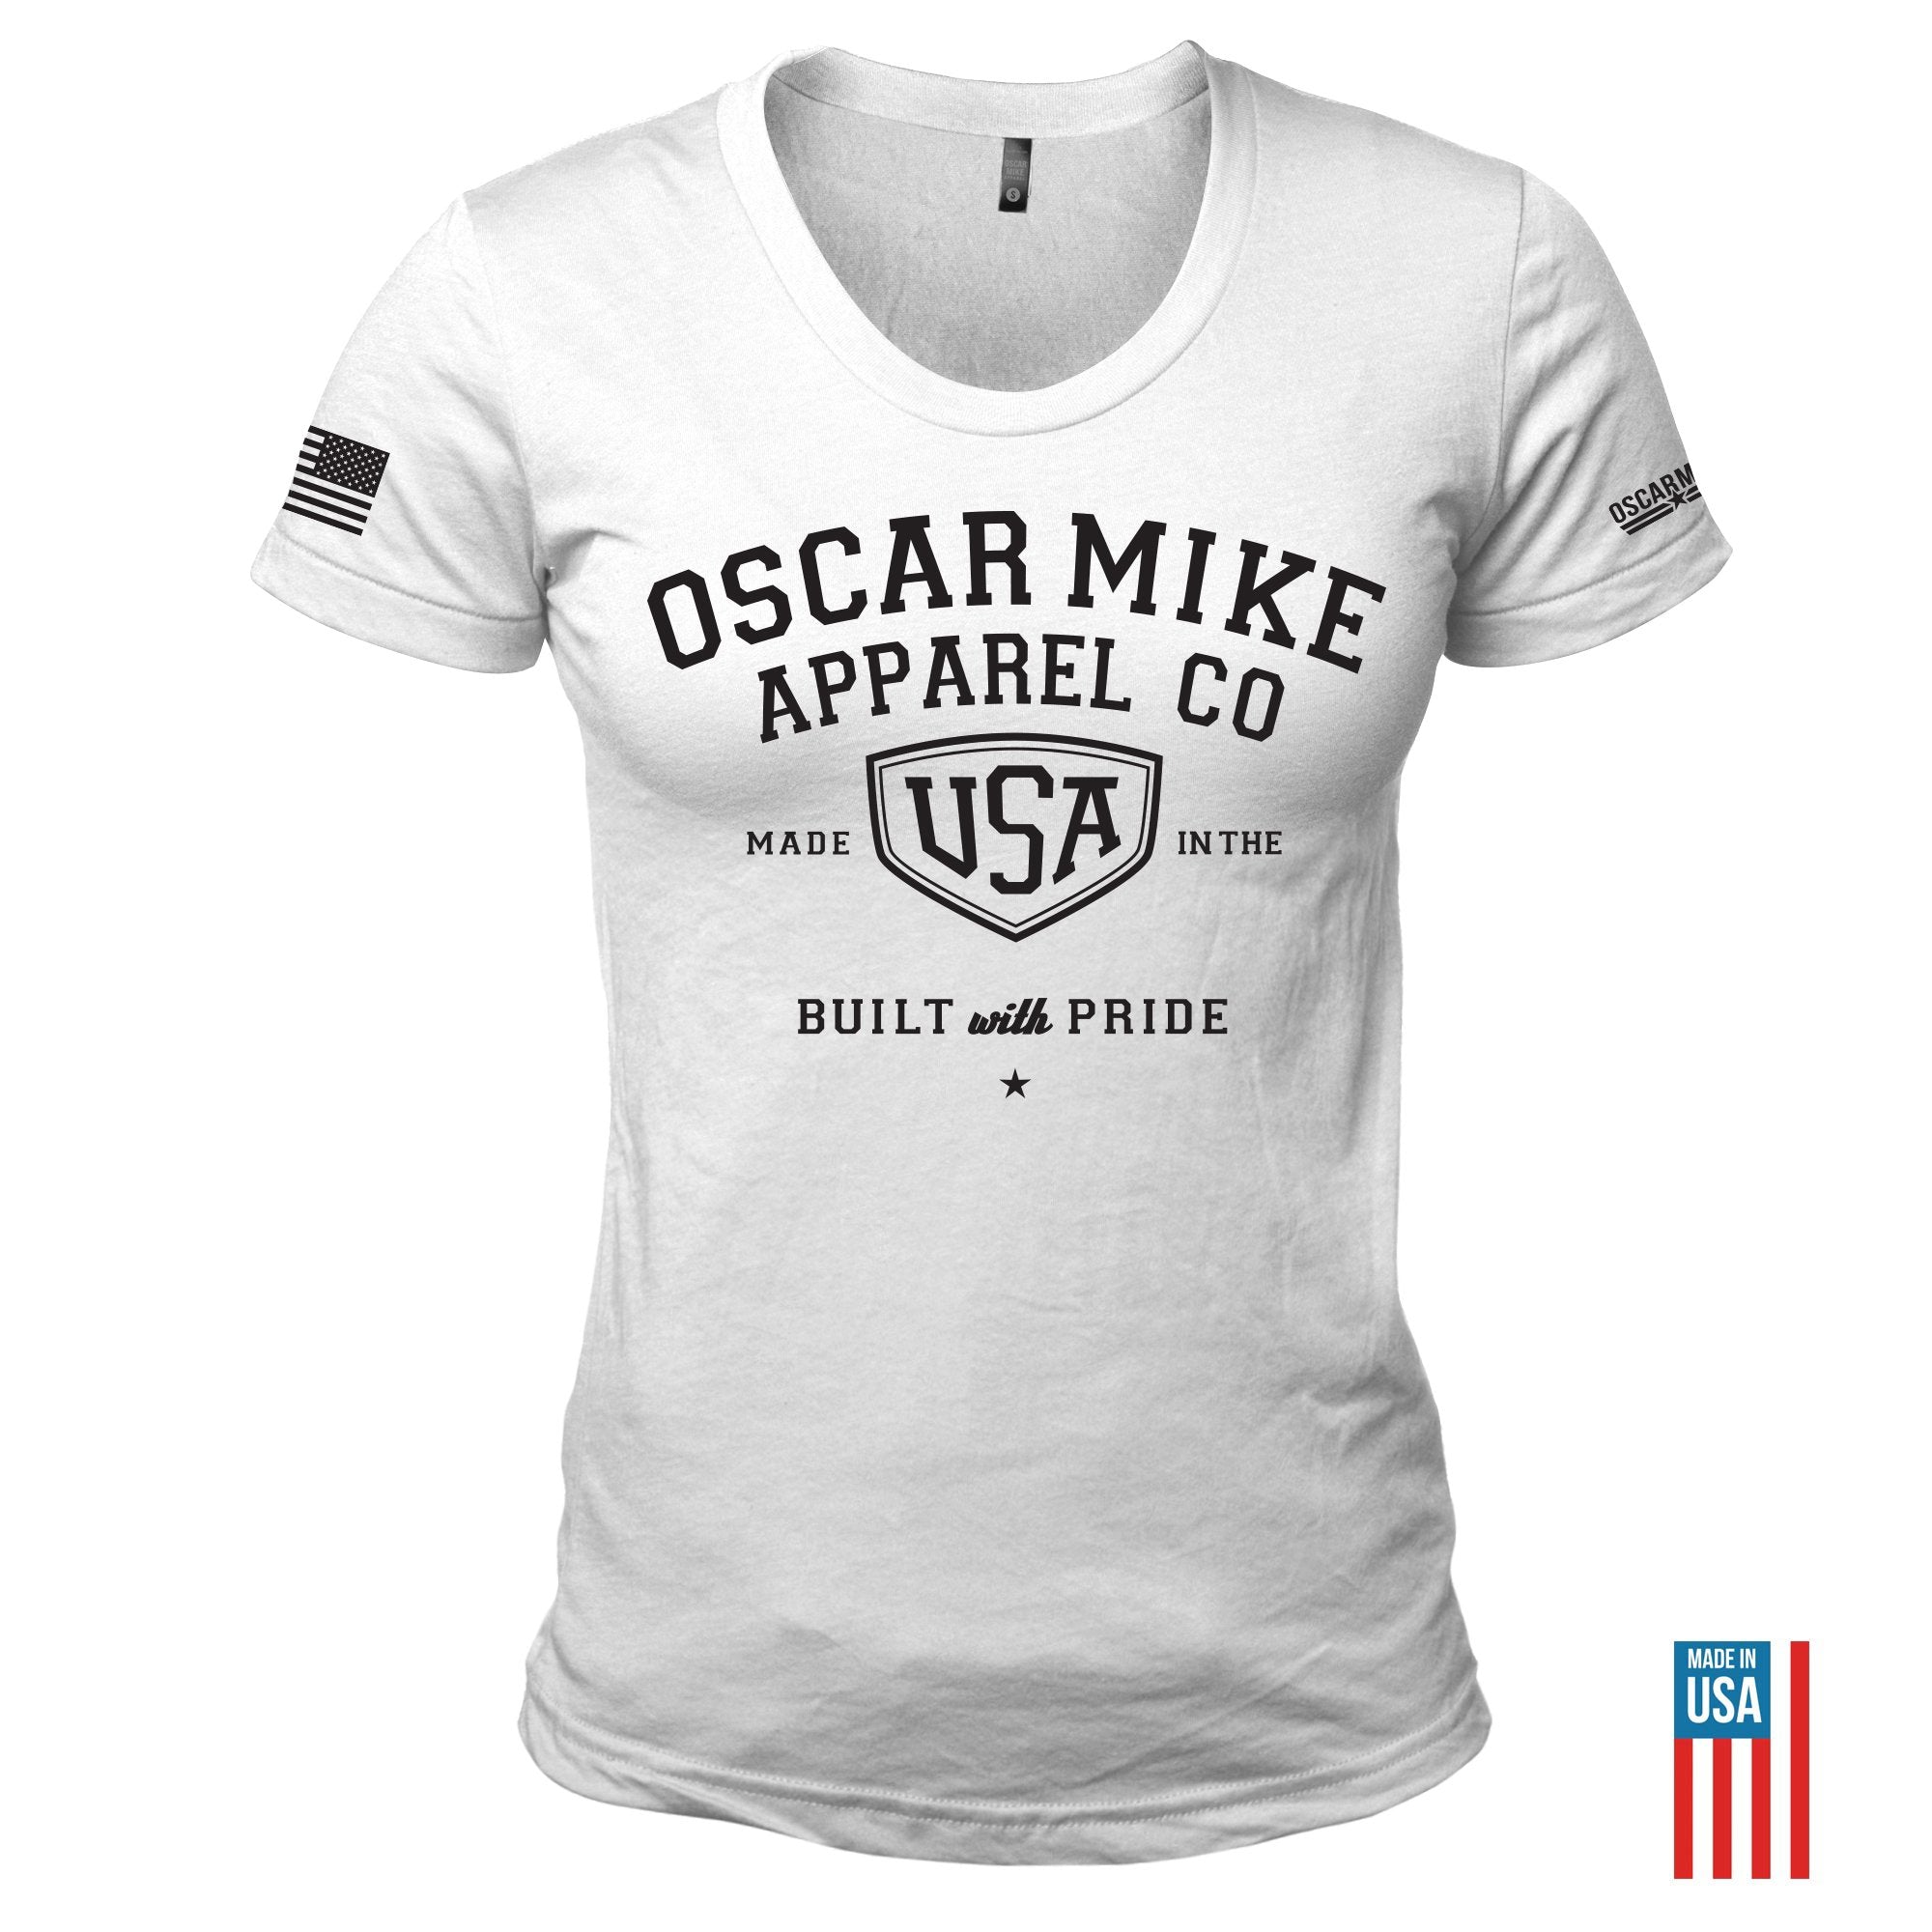 Women's Built With Pride  Tee T-Shirt from Oscar Mike Apparel